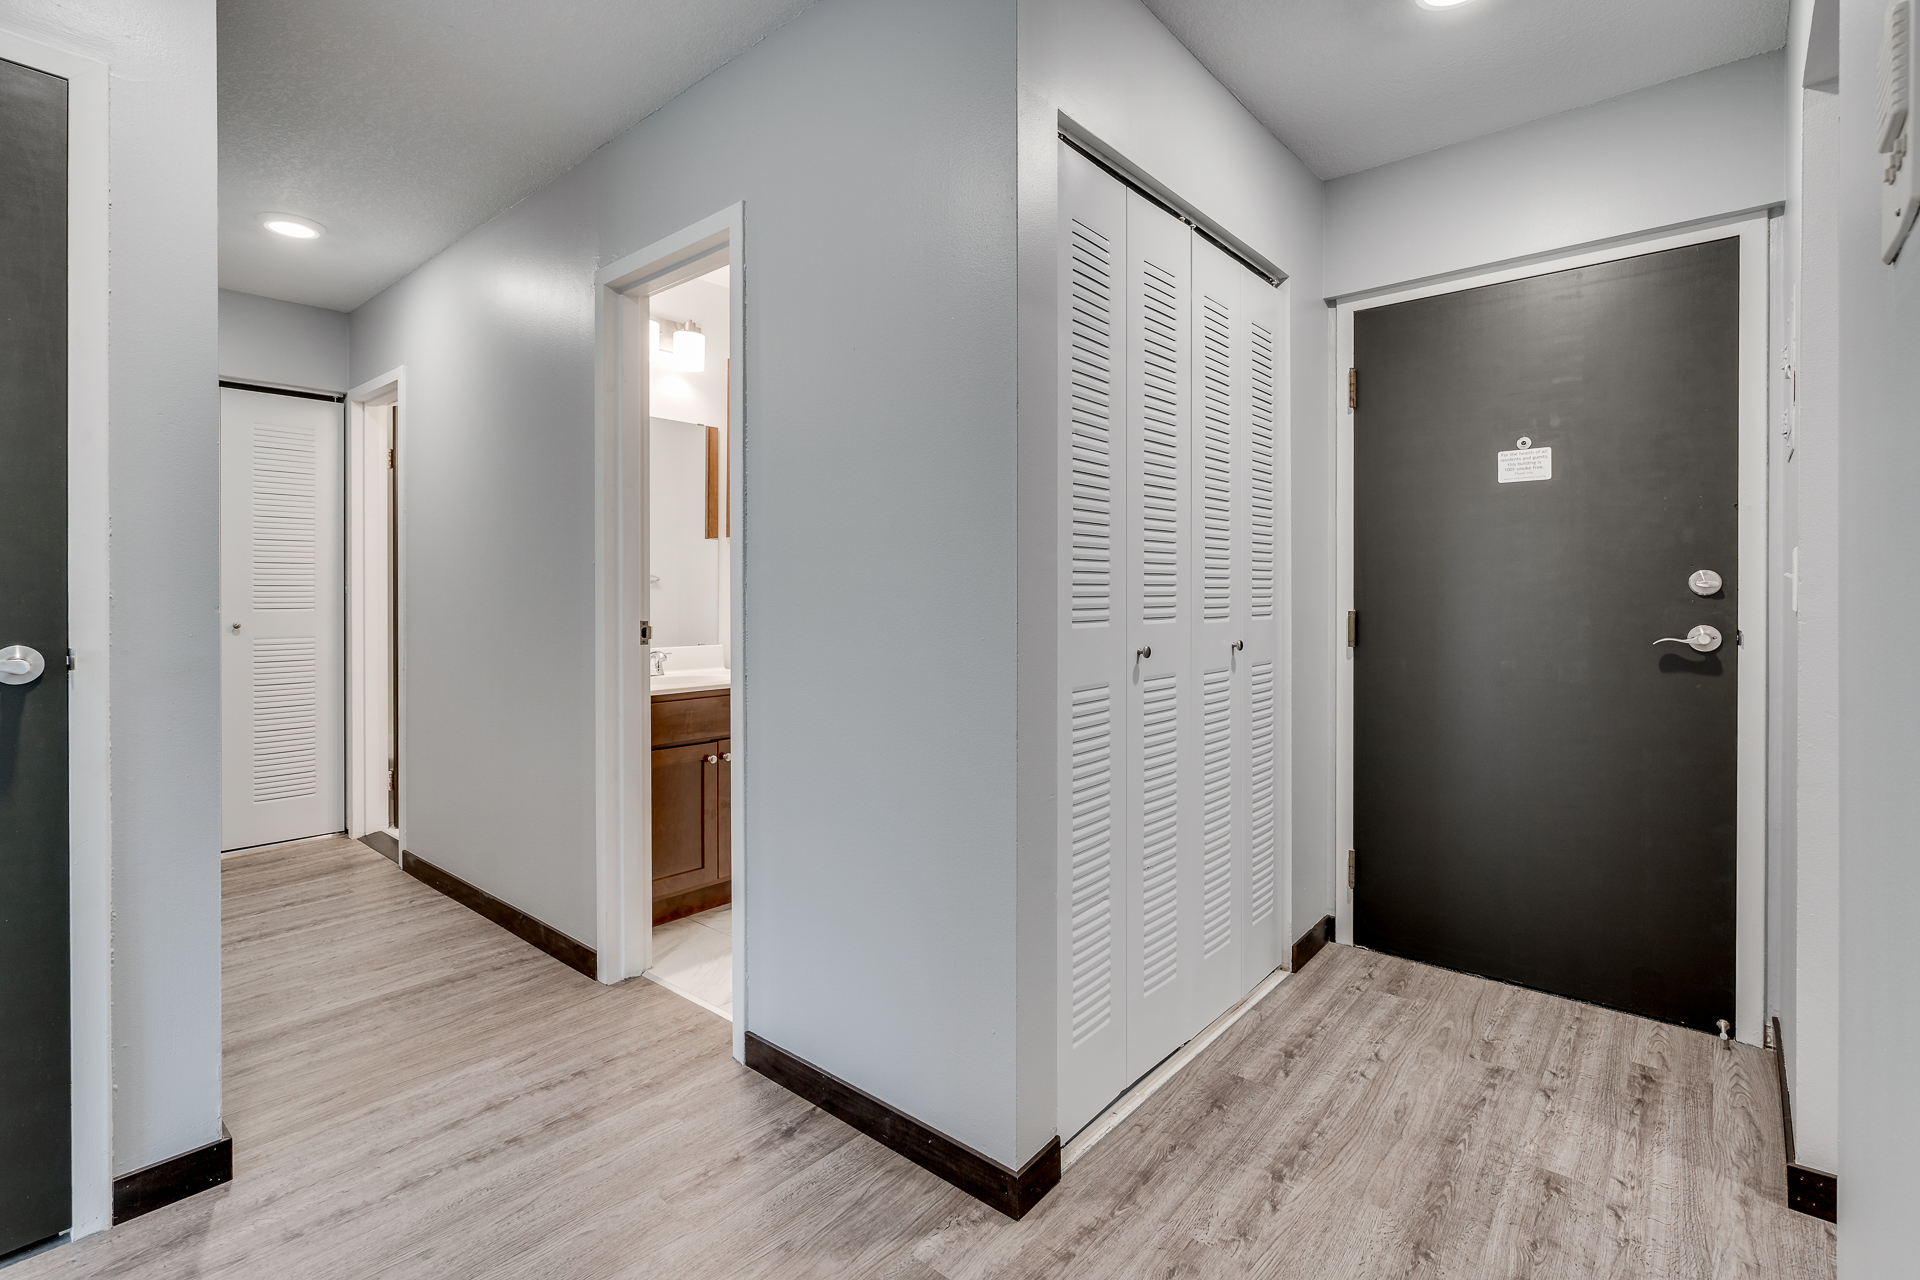 Entry way with view of closets and bathroom